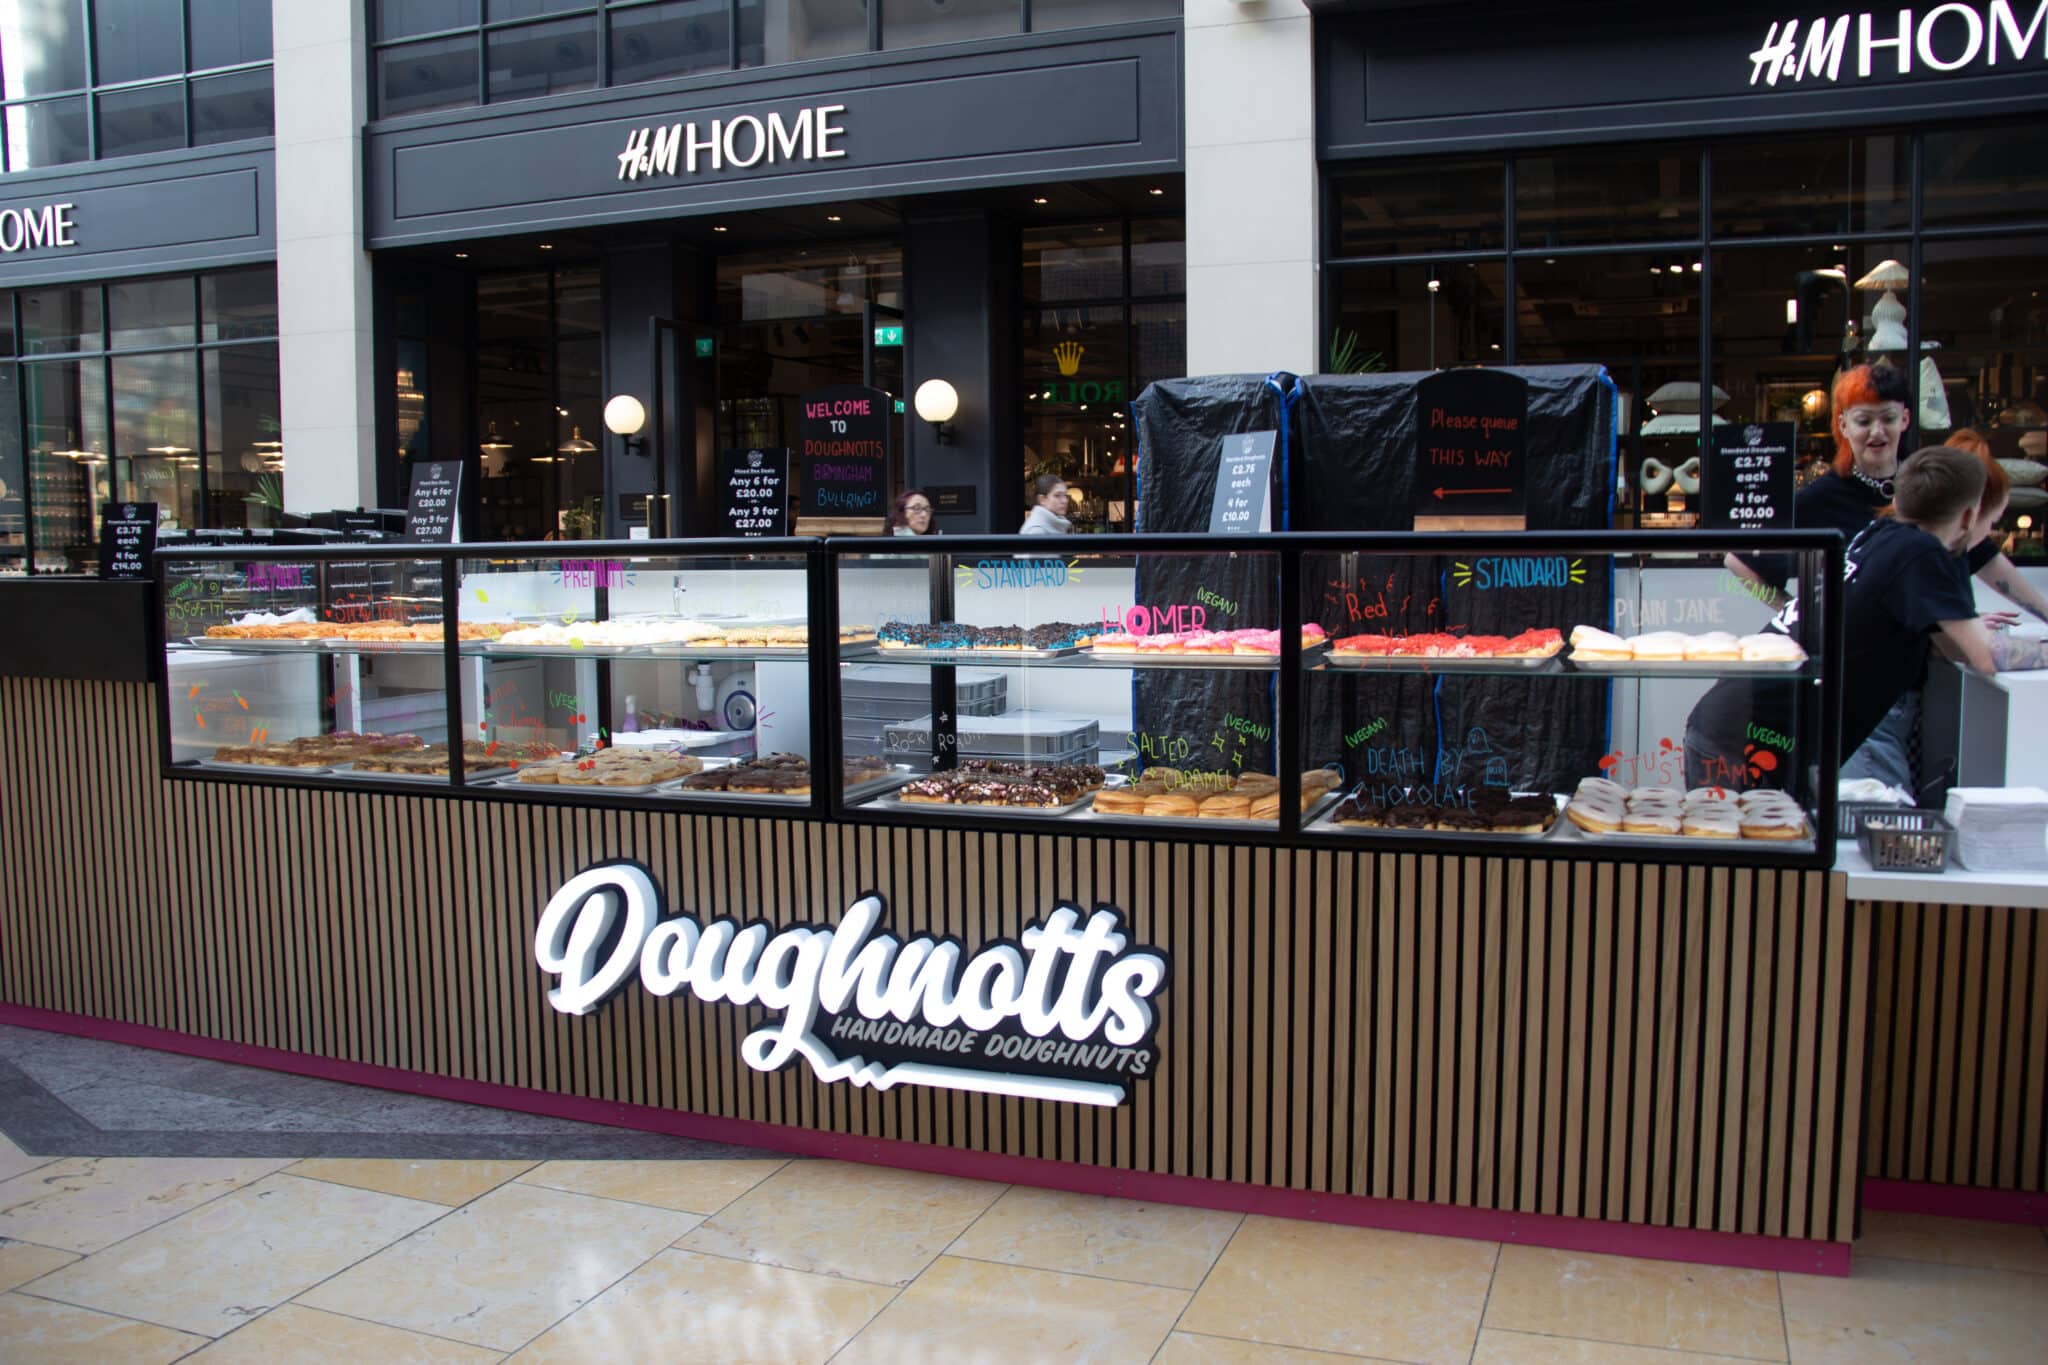 Doughnotts - Established in 2015. Produce handmade doughnuts, delivering nationwide with stores across the Midlands